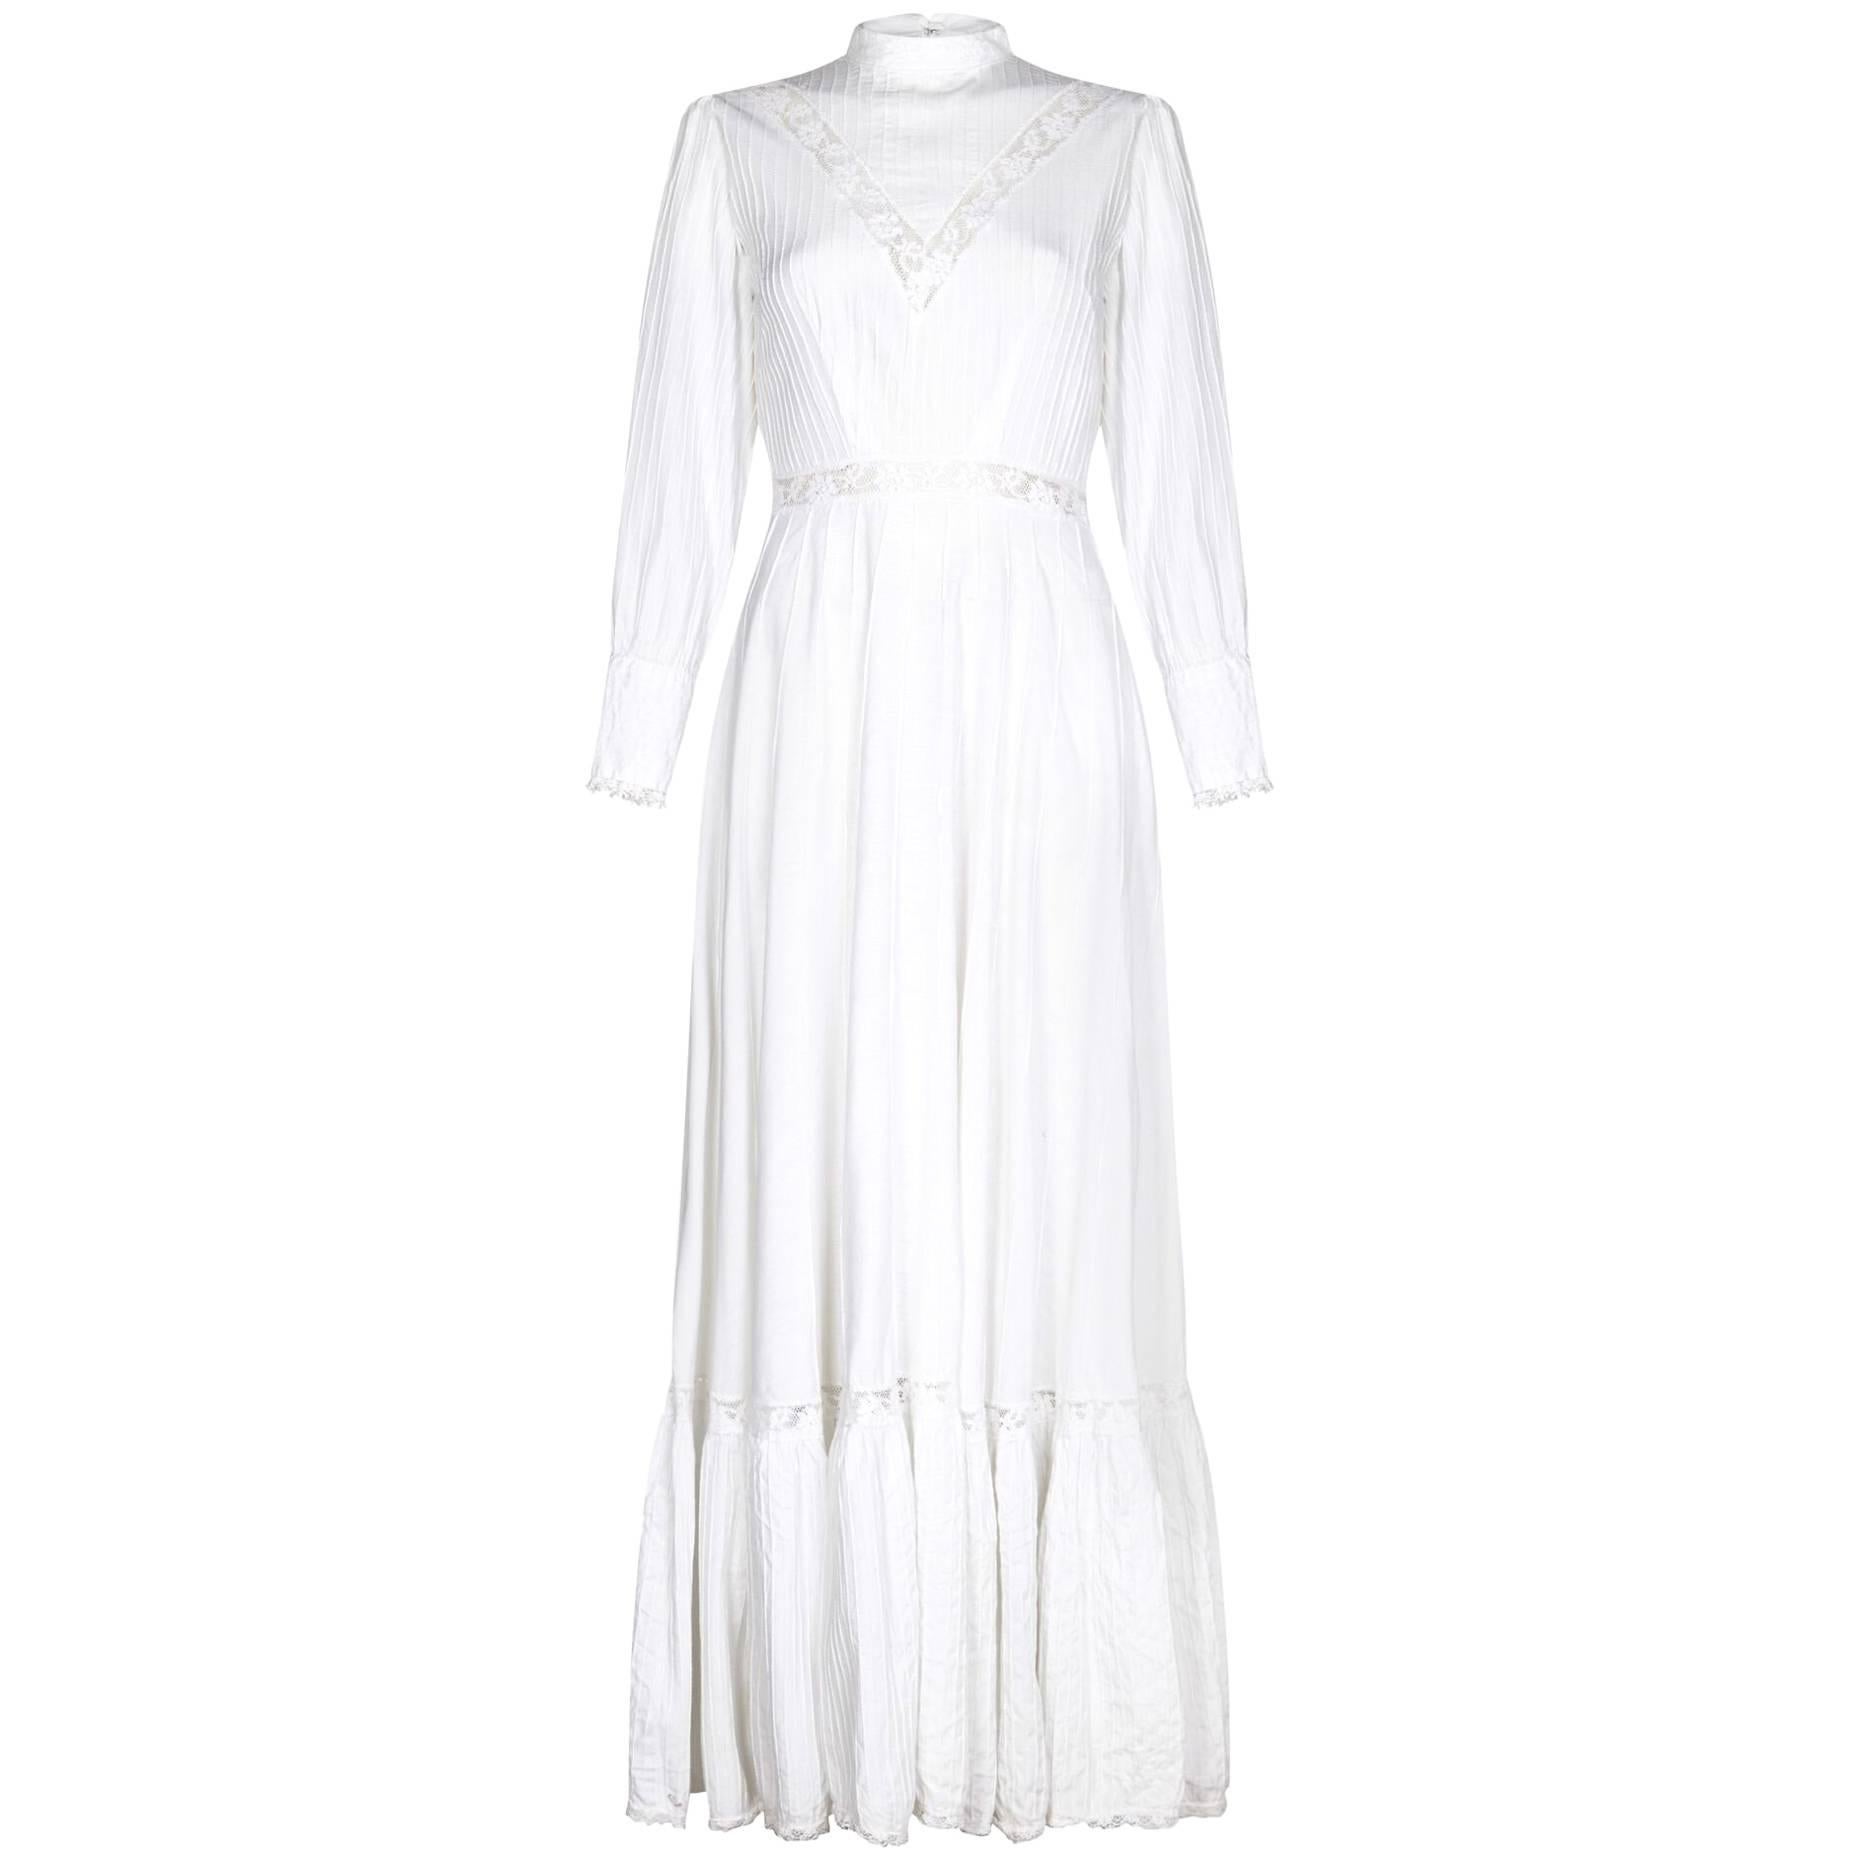 1970s Edwardian/Victorian Style White Lace Lawn Dress With Pin-Tuck Detail